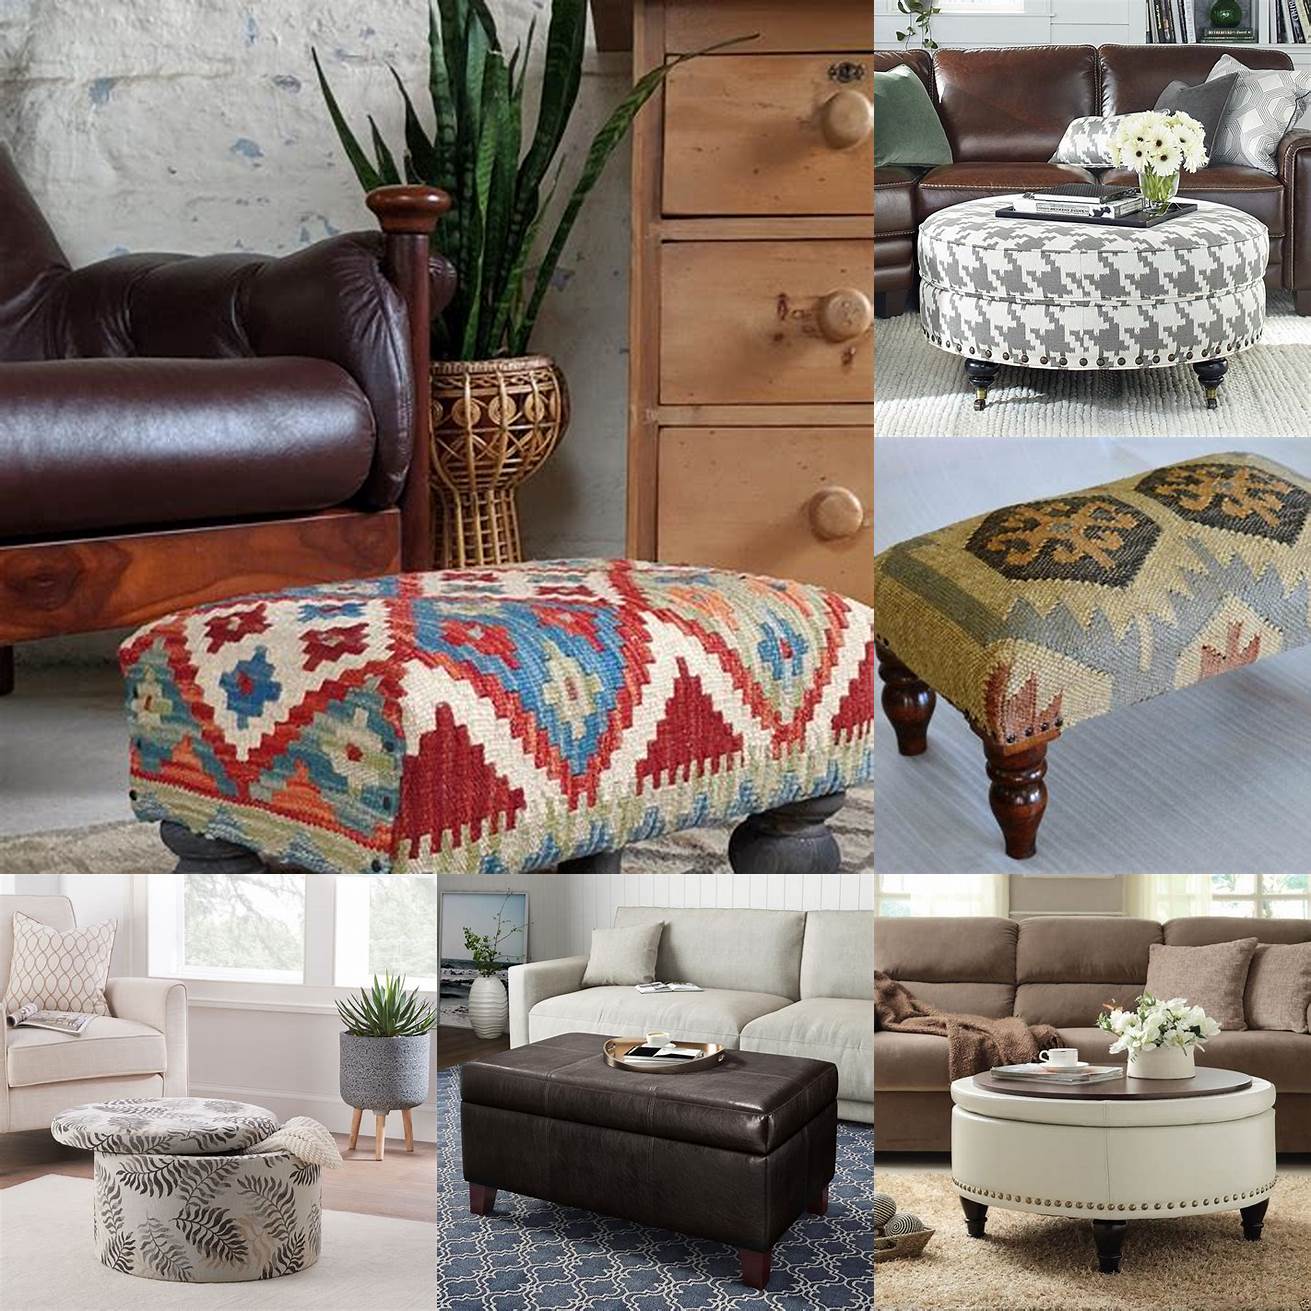 Start small If youre new to Ottoman furniture start with a few small pieces such as a kilim rug or a tea set to get a feel for the aesthetic